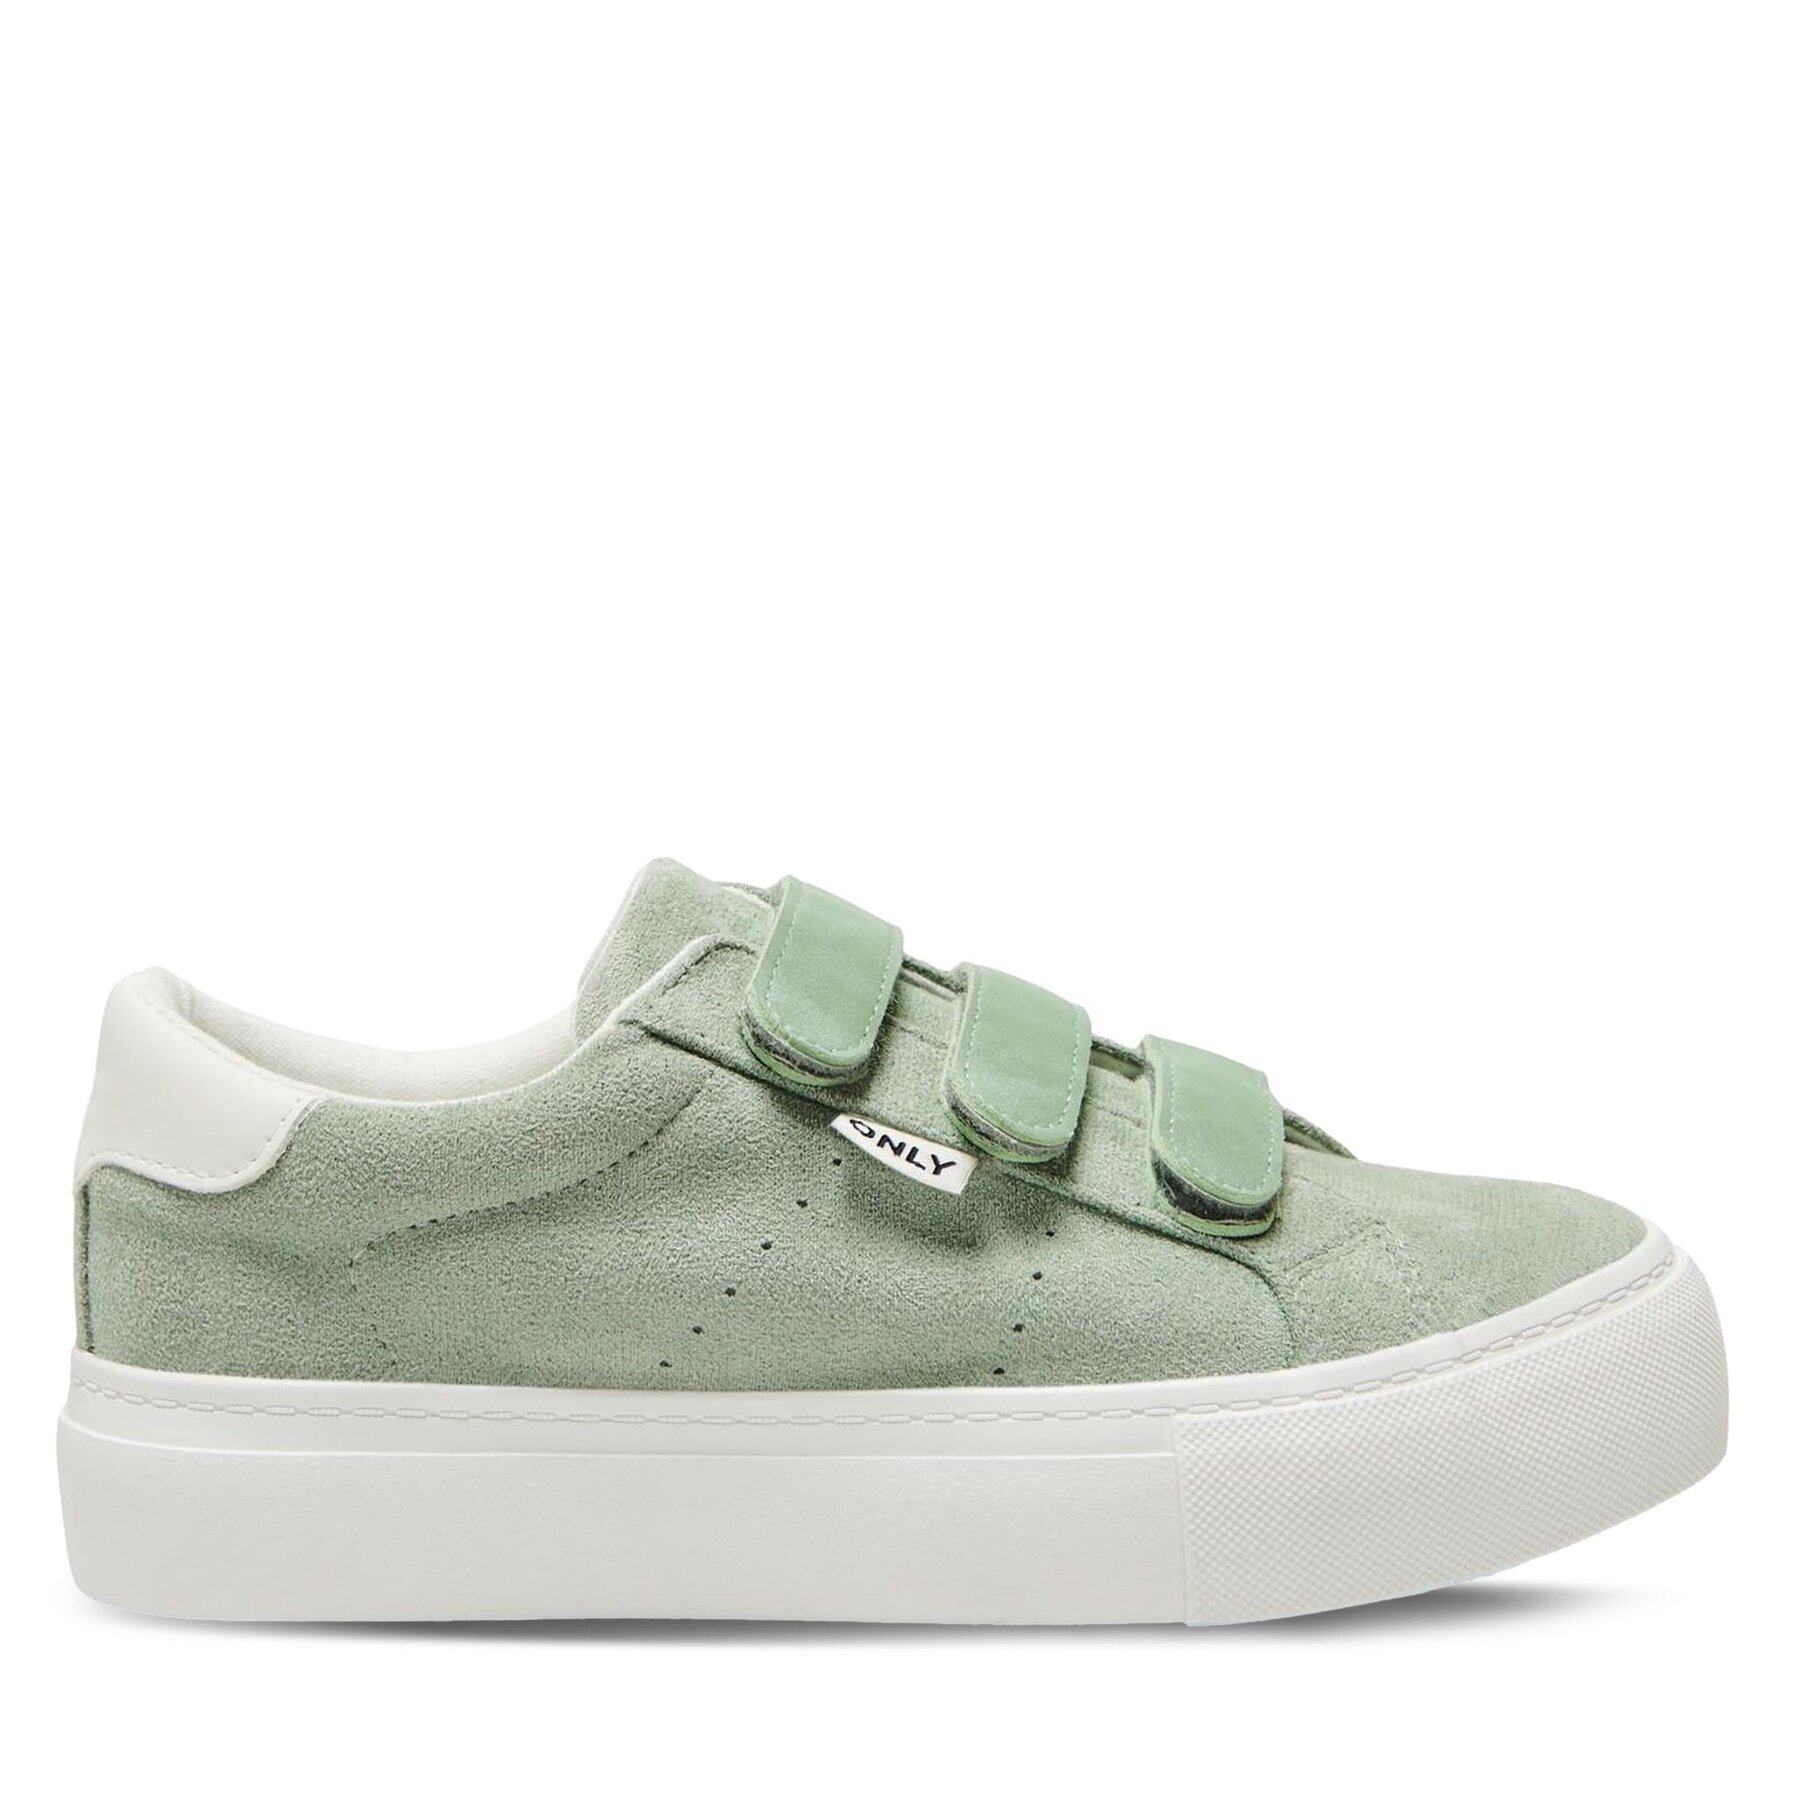 Sneakers ONLY Shoes Donna 15320483 Grön